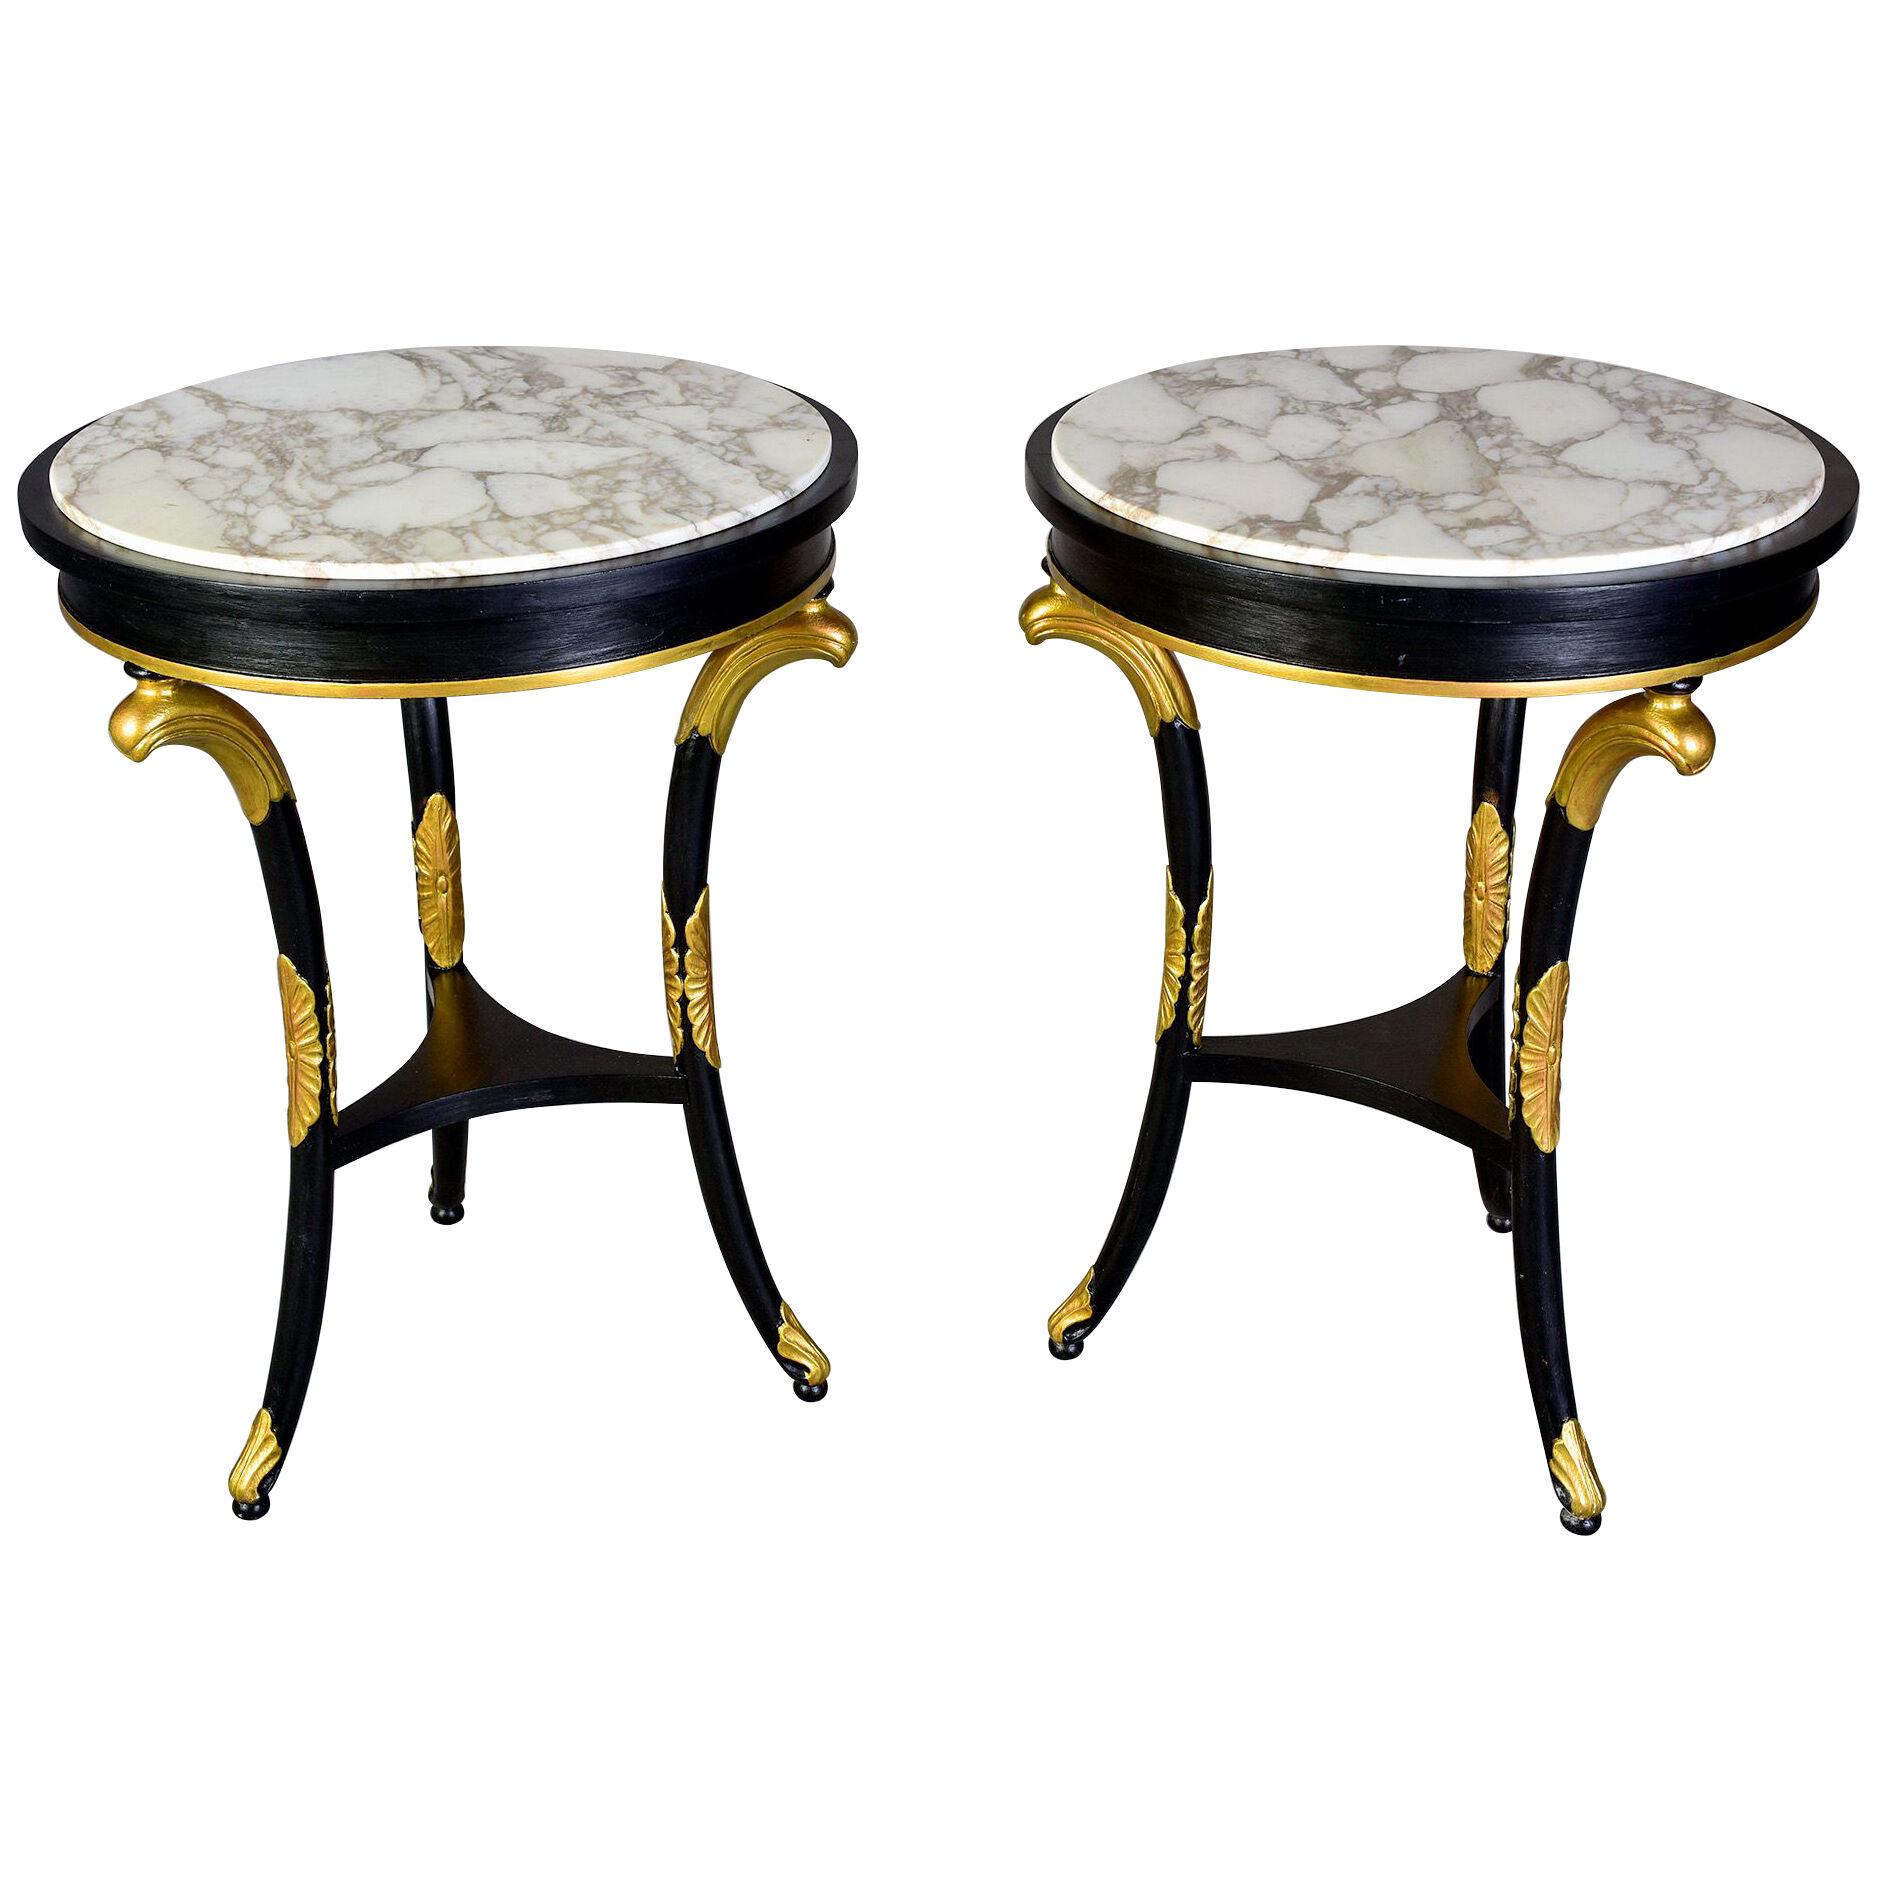 Pair Late 19th C Regency Ebonised Tables With Gilt Wood Fittings and Marble Tops